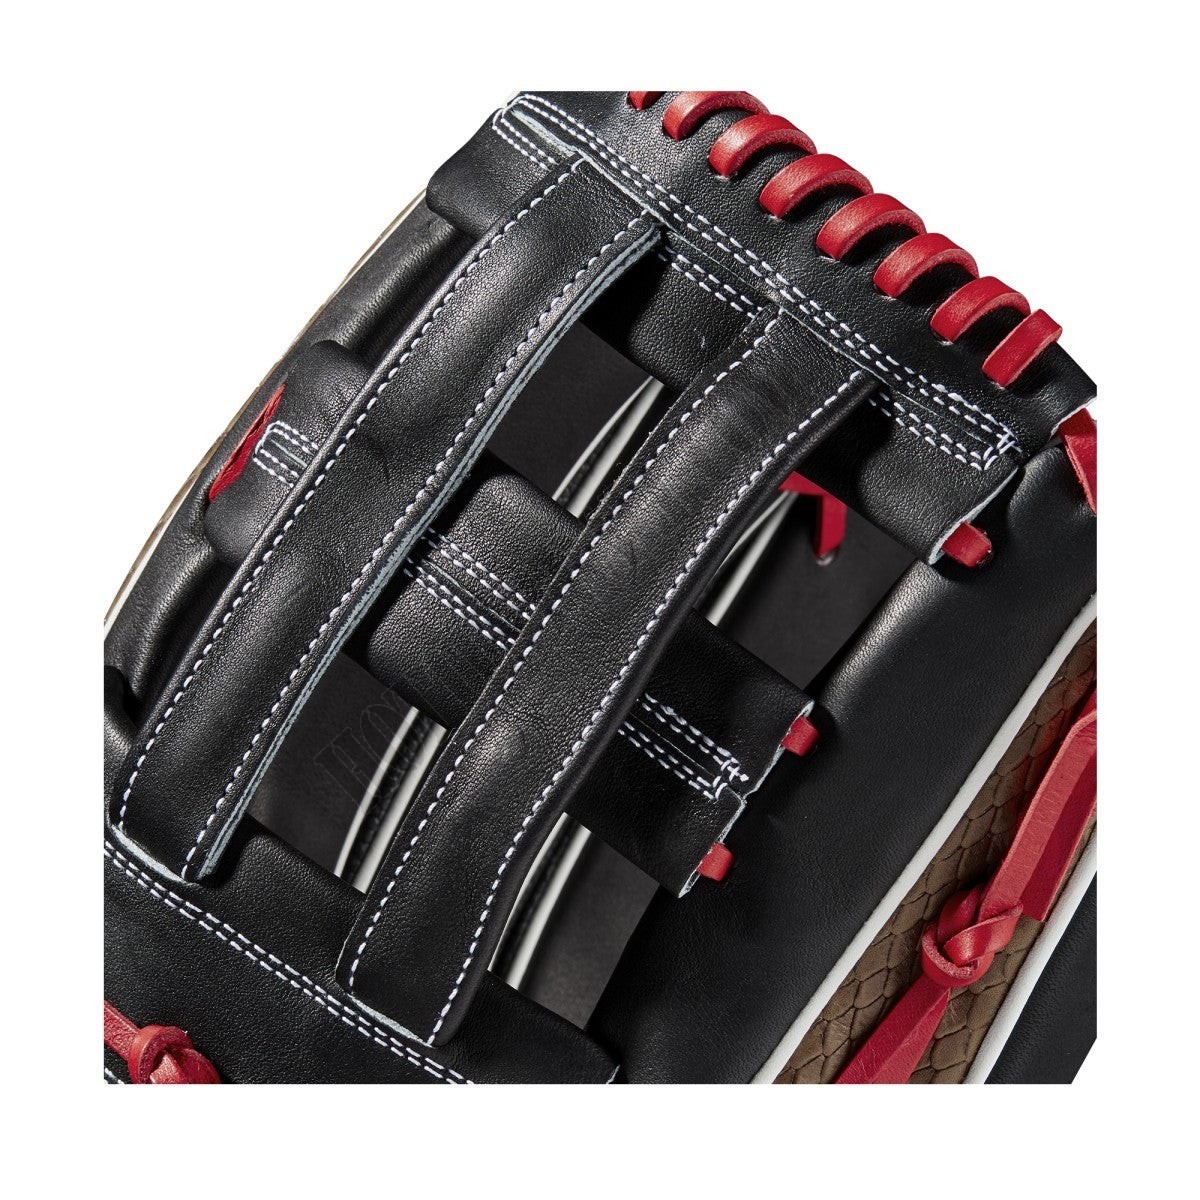 2021 A2K 1799SS 12.75" Outfield Baseball Glove ● Wilson Promotions - -5